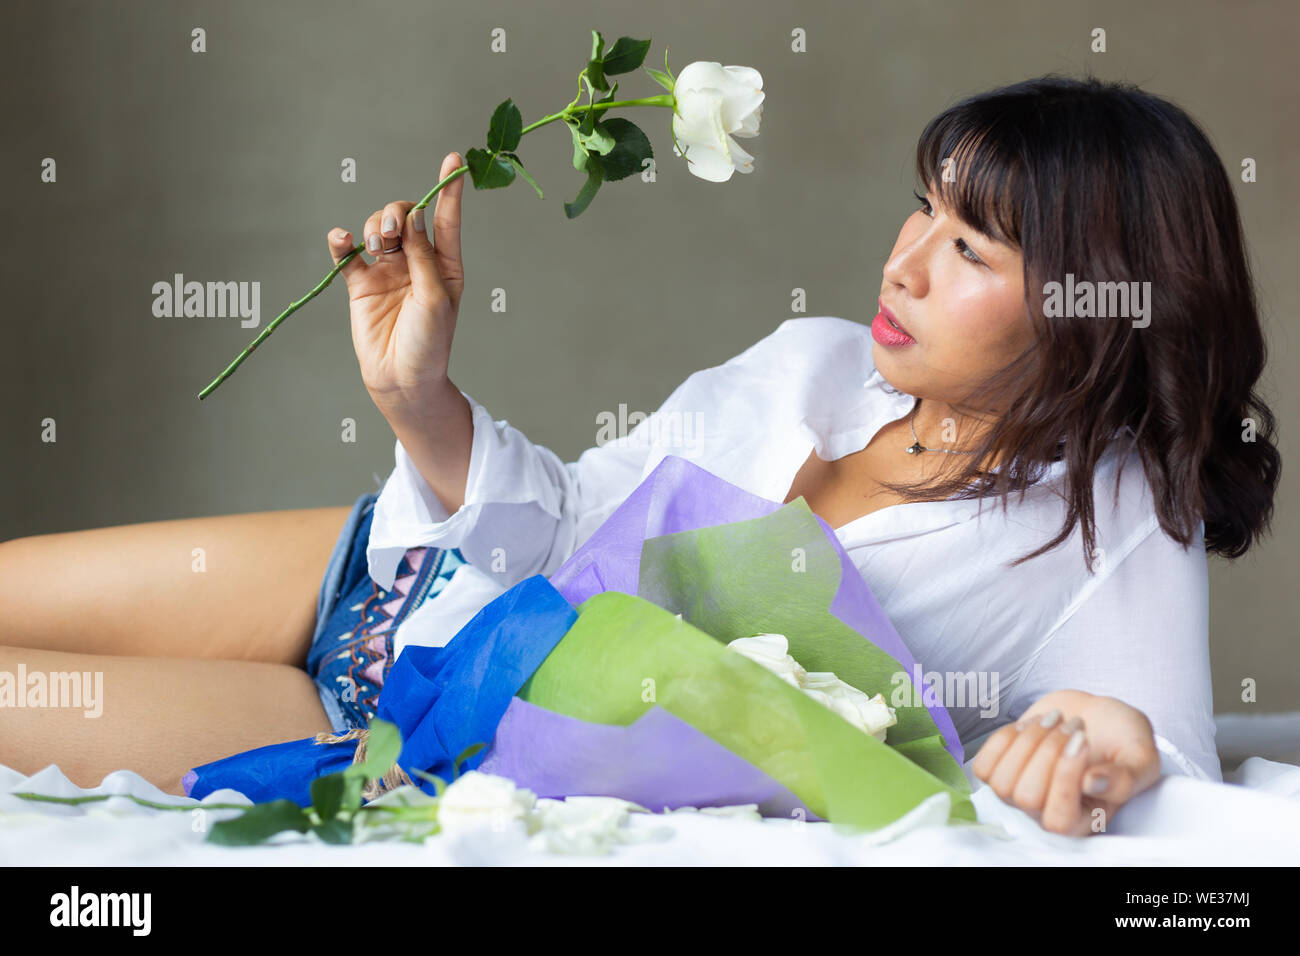 The girl with the flower in her room Stock Photo